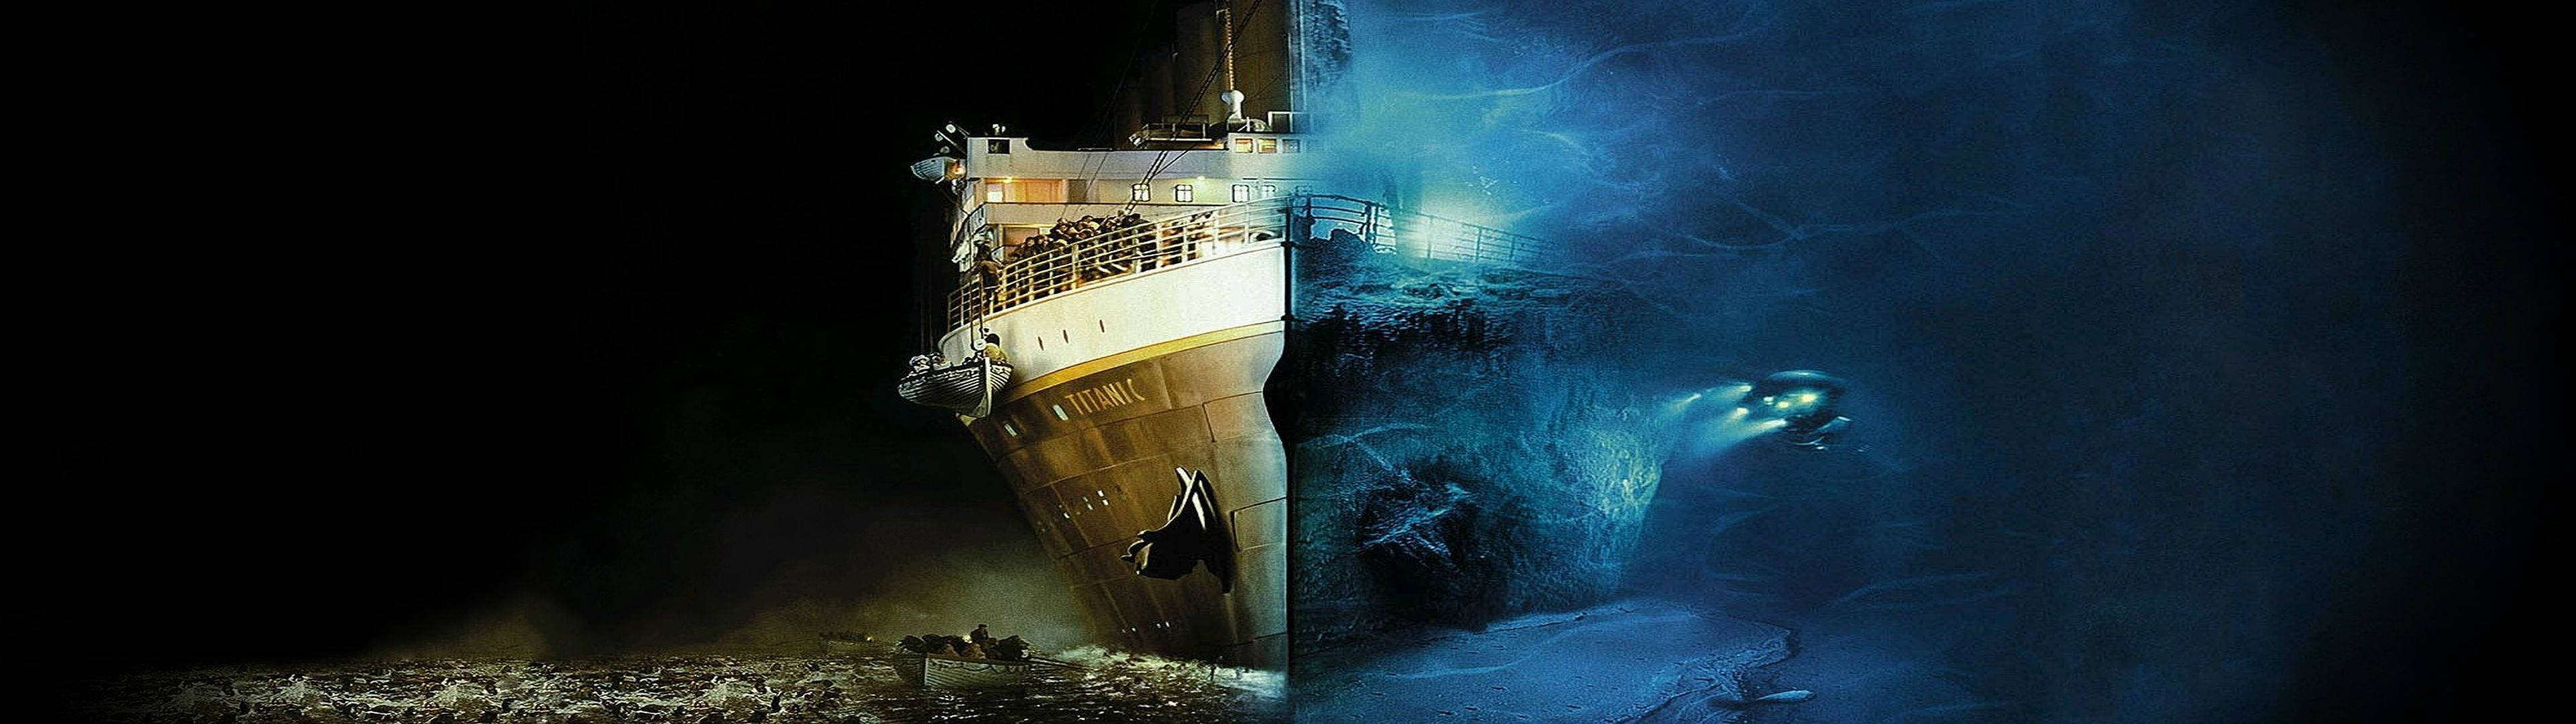 View Of The Titanic Above And Below The Sea Background